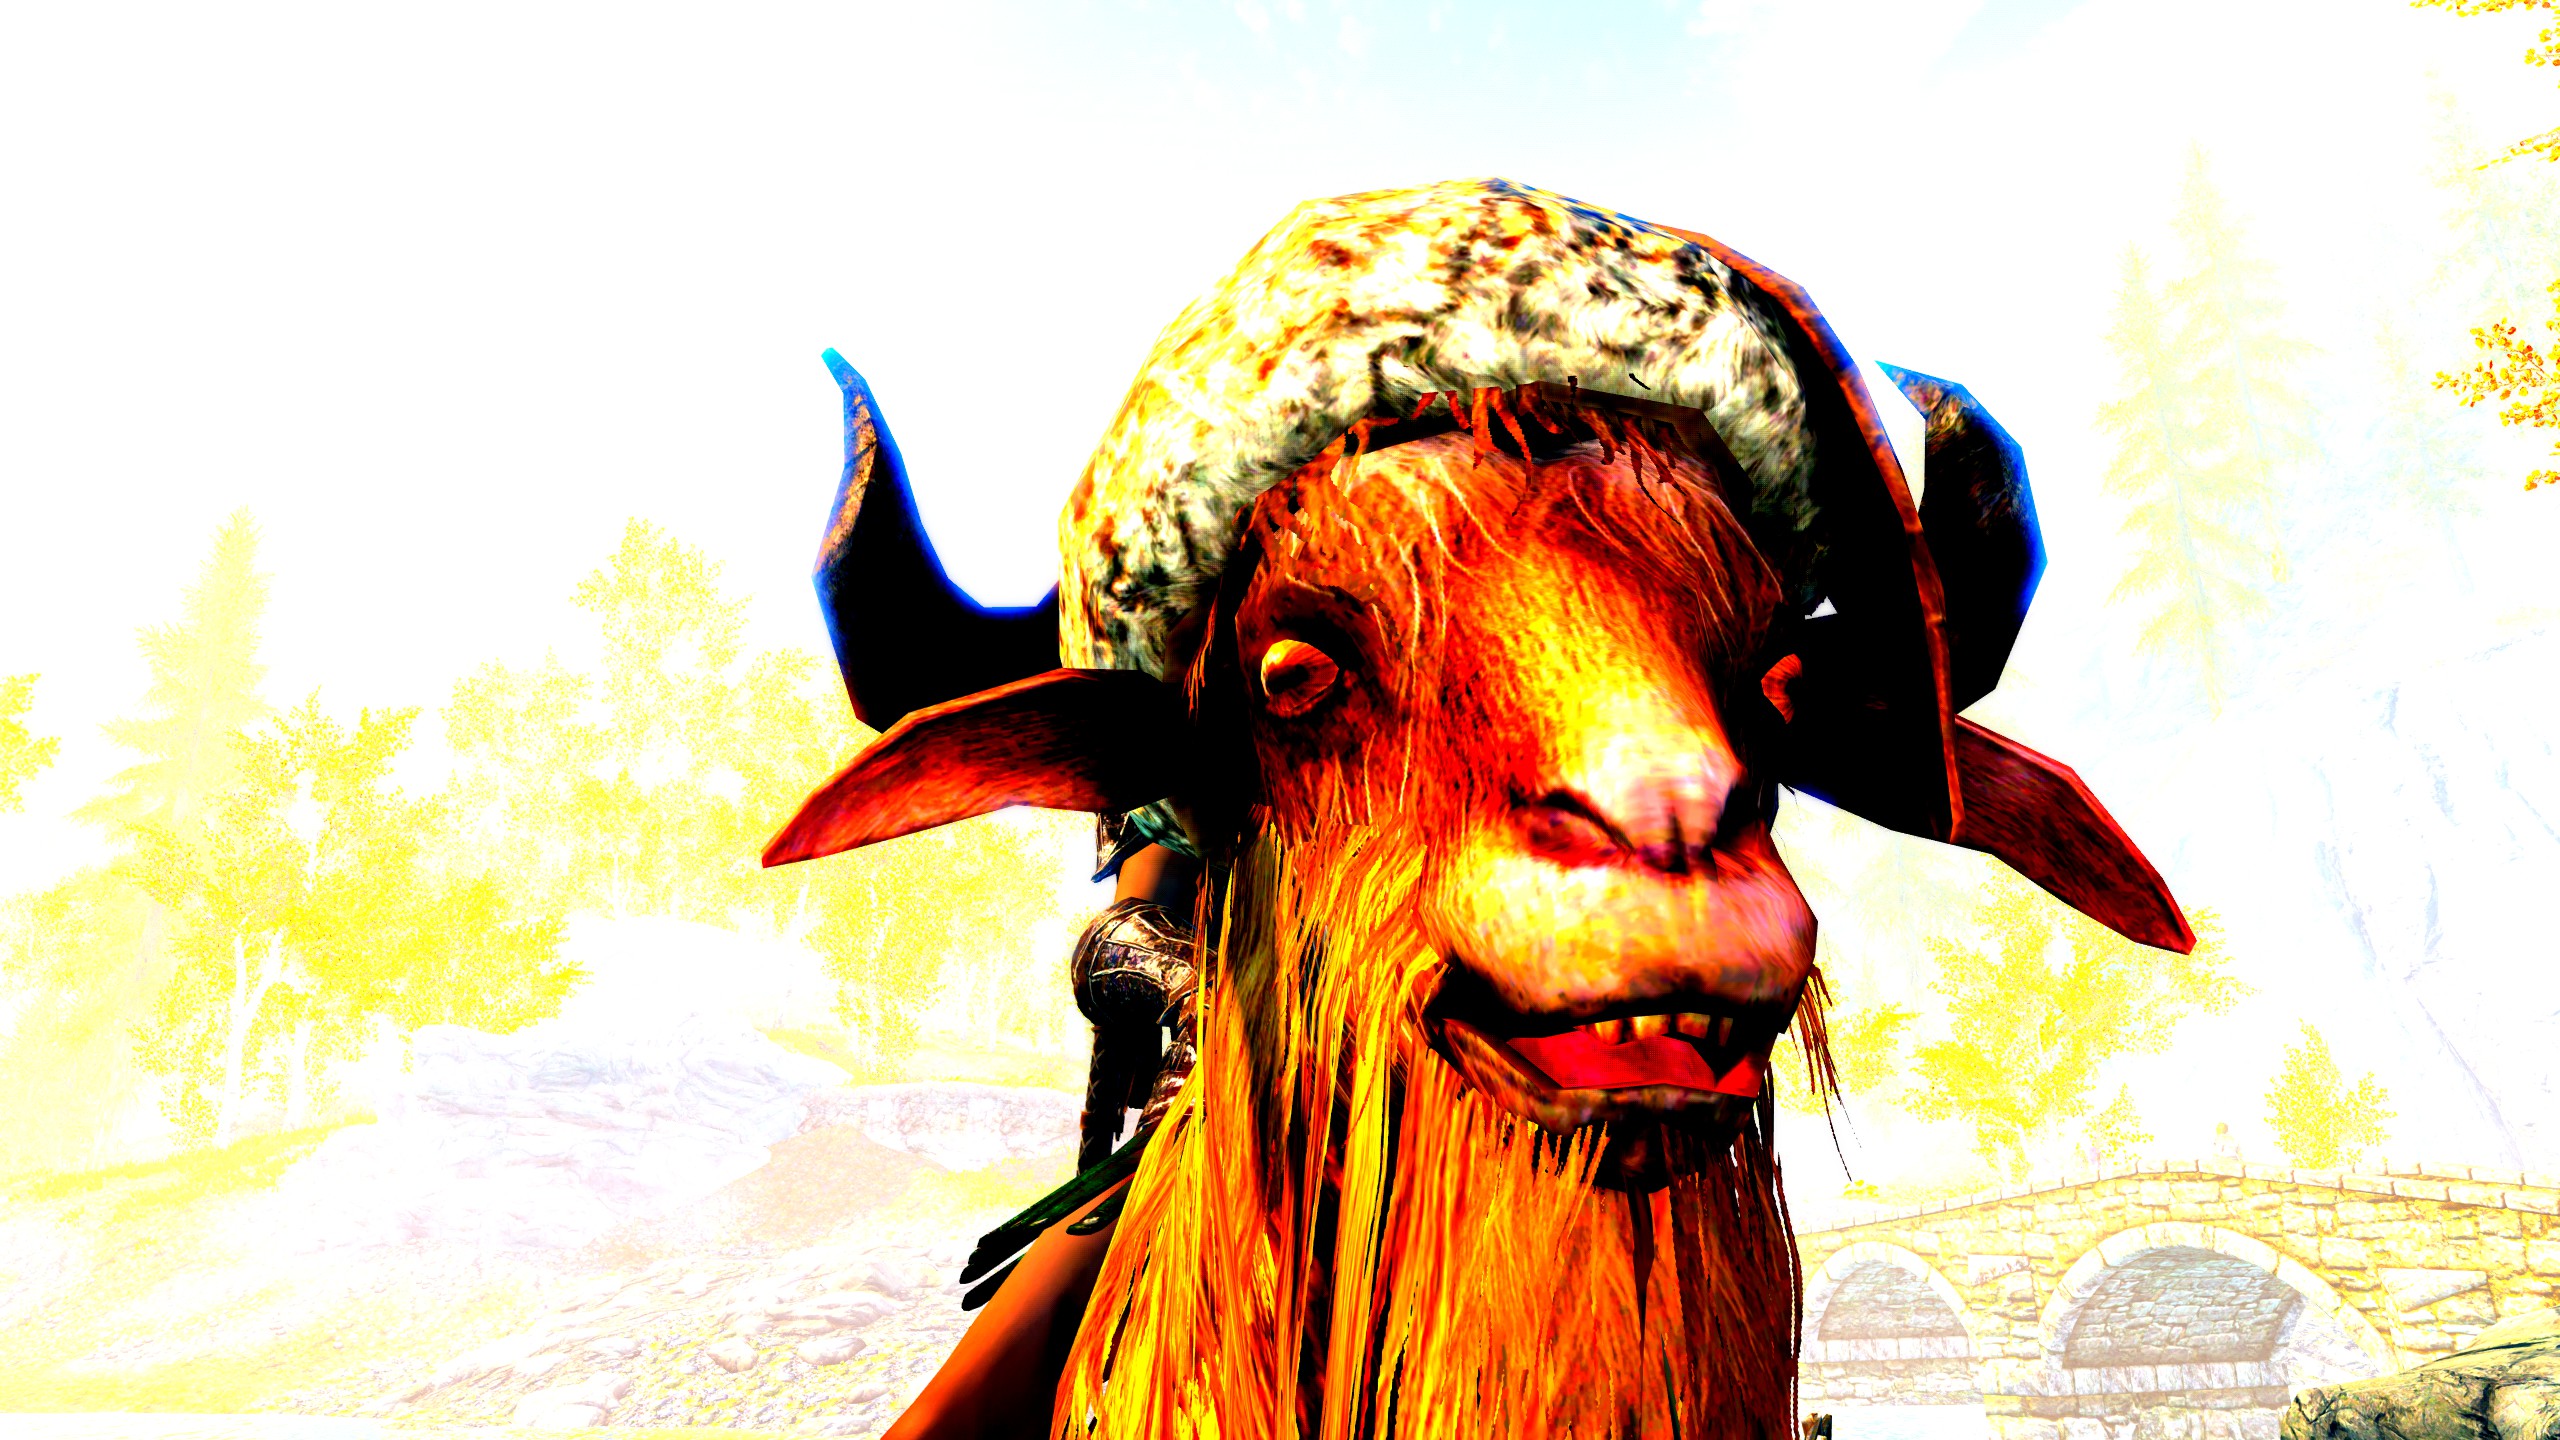  I found a Skyrim mod that adds skooma hallucinations, now I'm a drug addict with an imaginary goat 